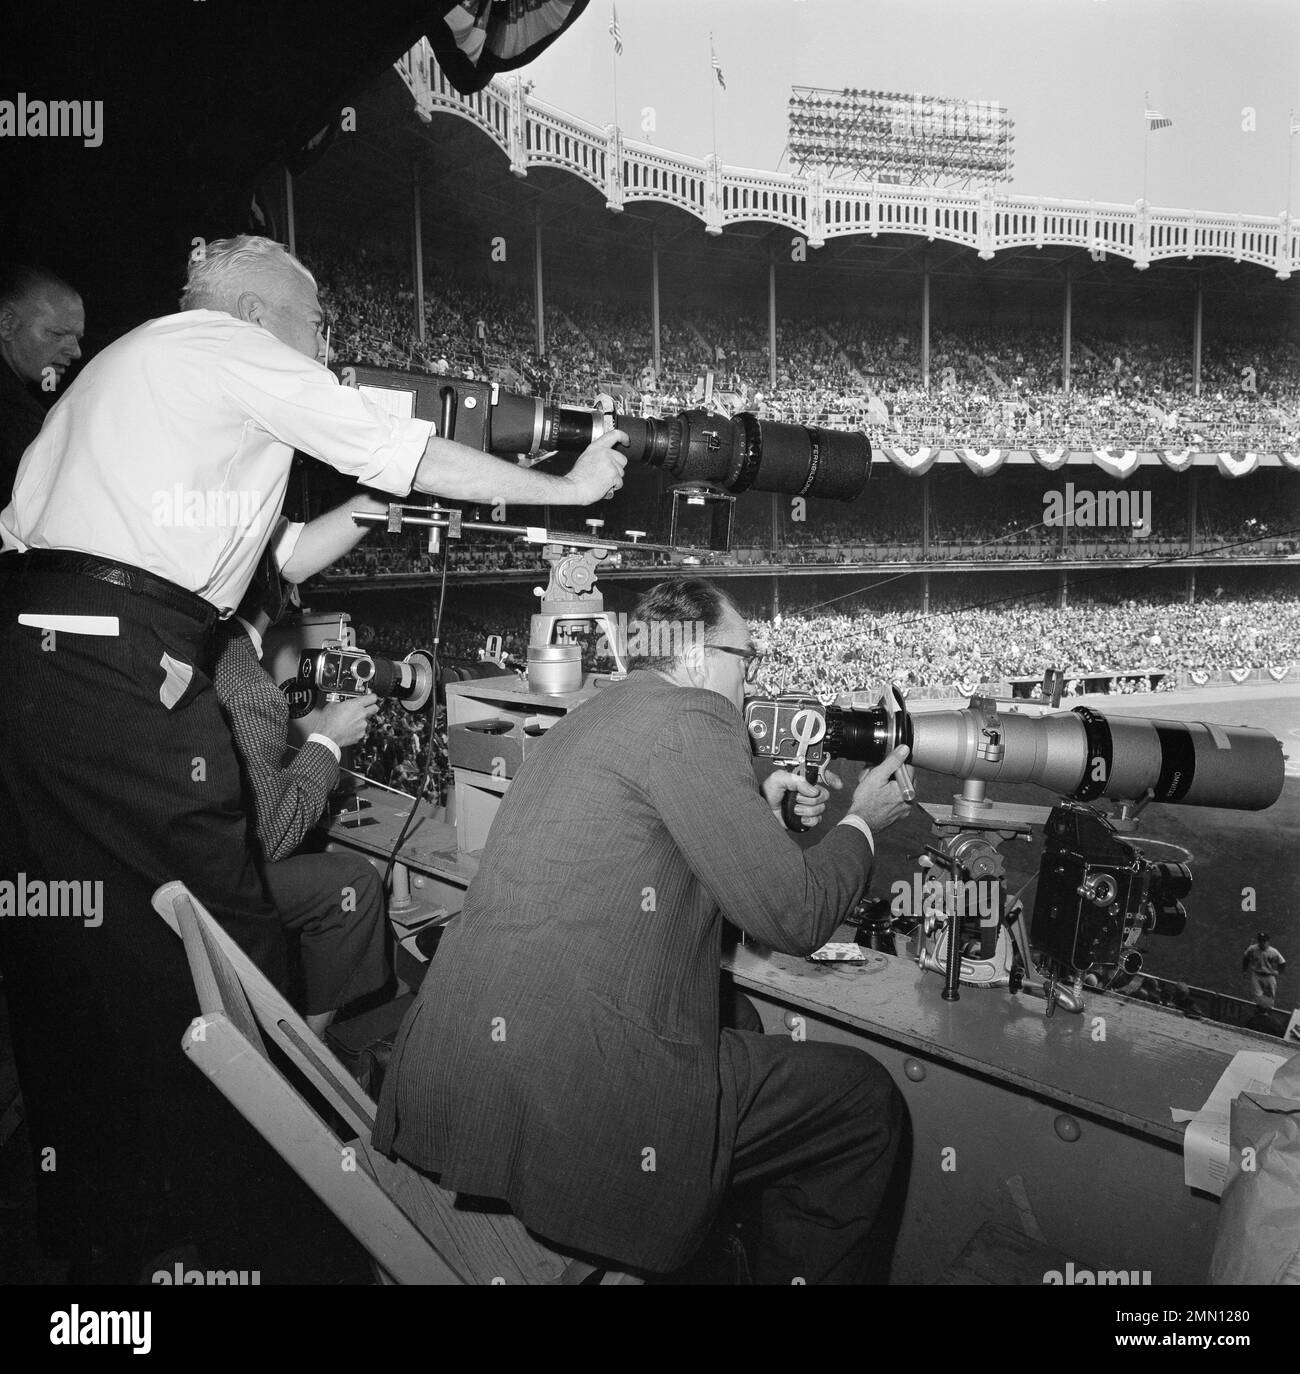 Photographers of the Associated Press are pictured at work in Yankee  Stadium in New York, covering the second game of the 1961 World Series  between the New York Yankees and the Cincinnati